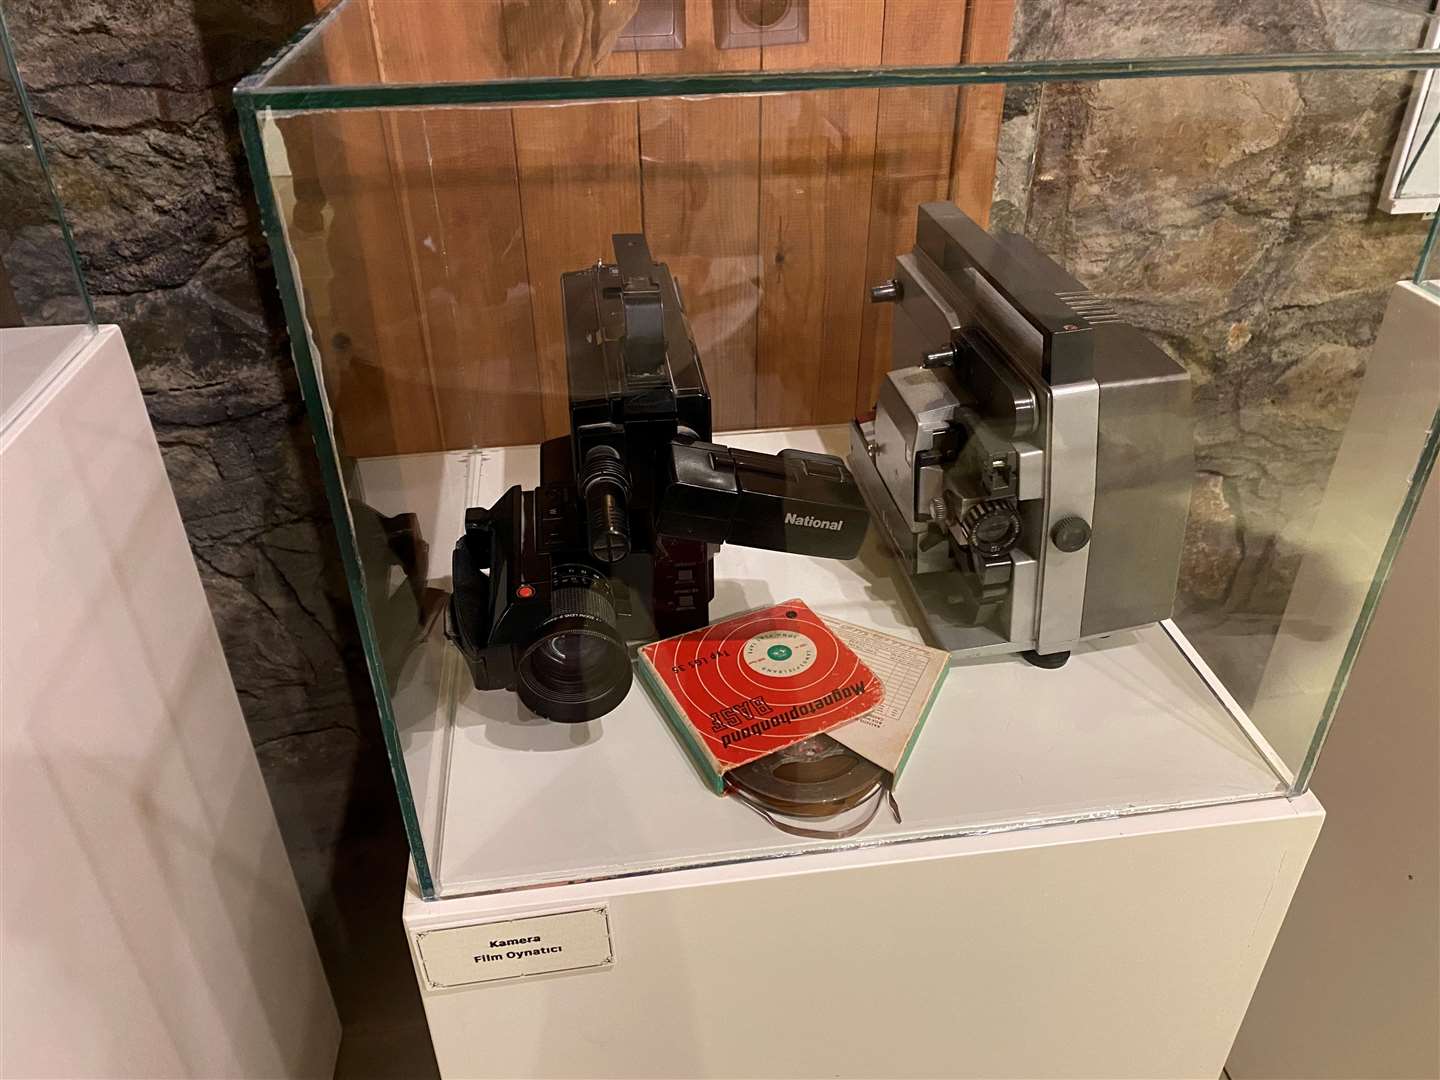 Some of the technology up for display at the Kenan Yavuz Ethnography Museum